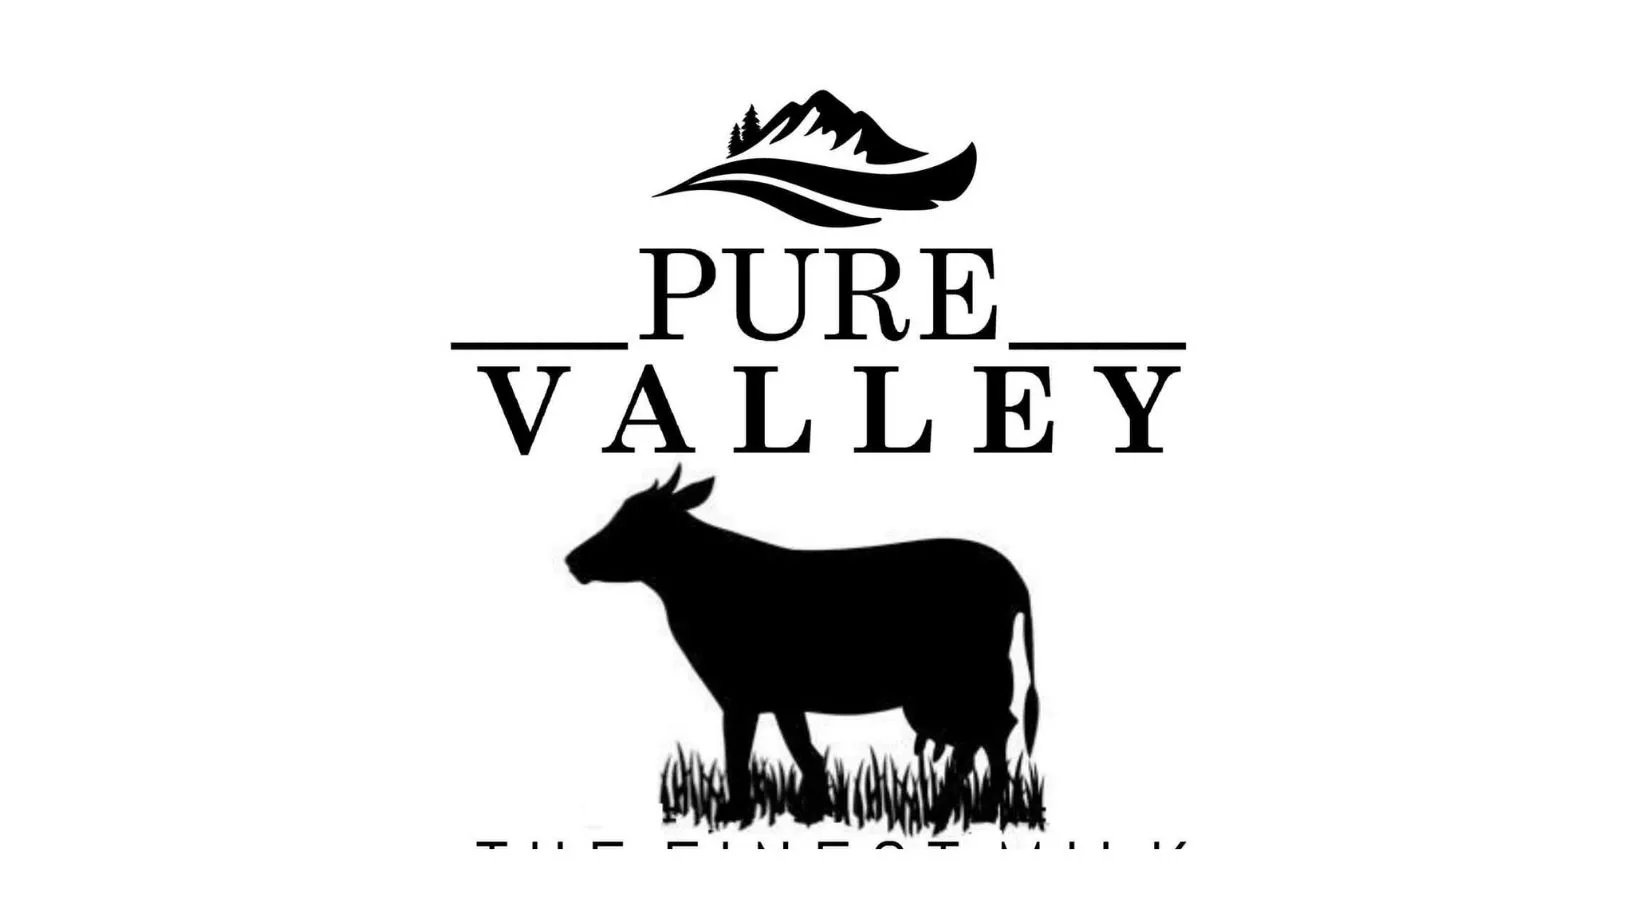 Pure Valley